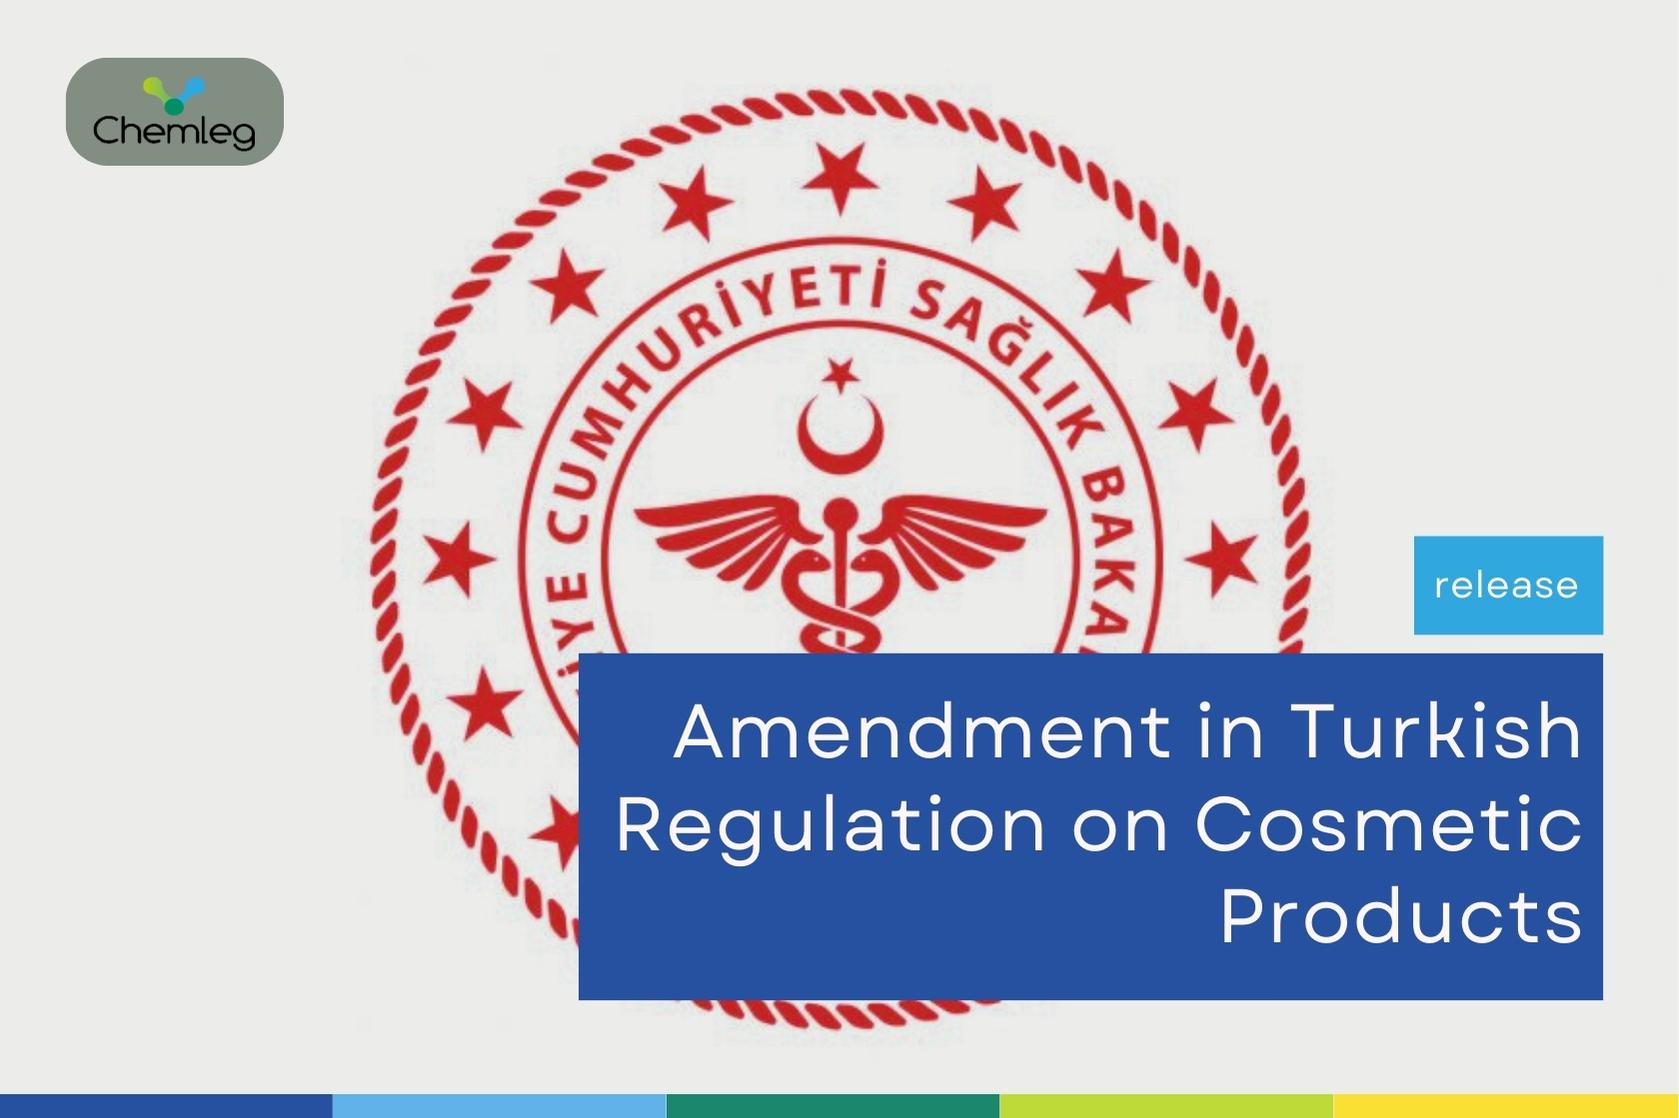 Amendments Have Been Made in the Turkish Regulation on Cosmetics